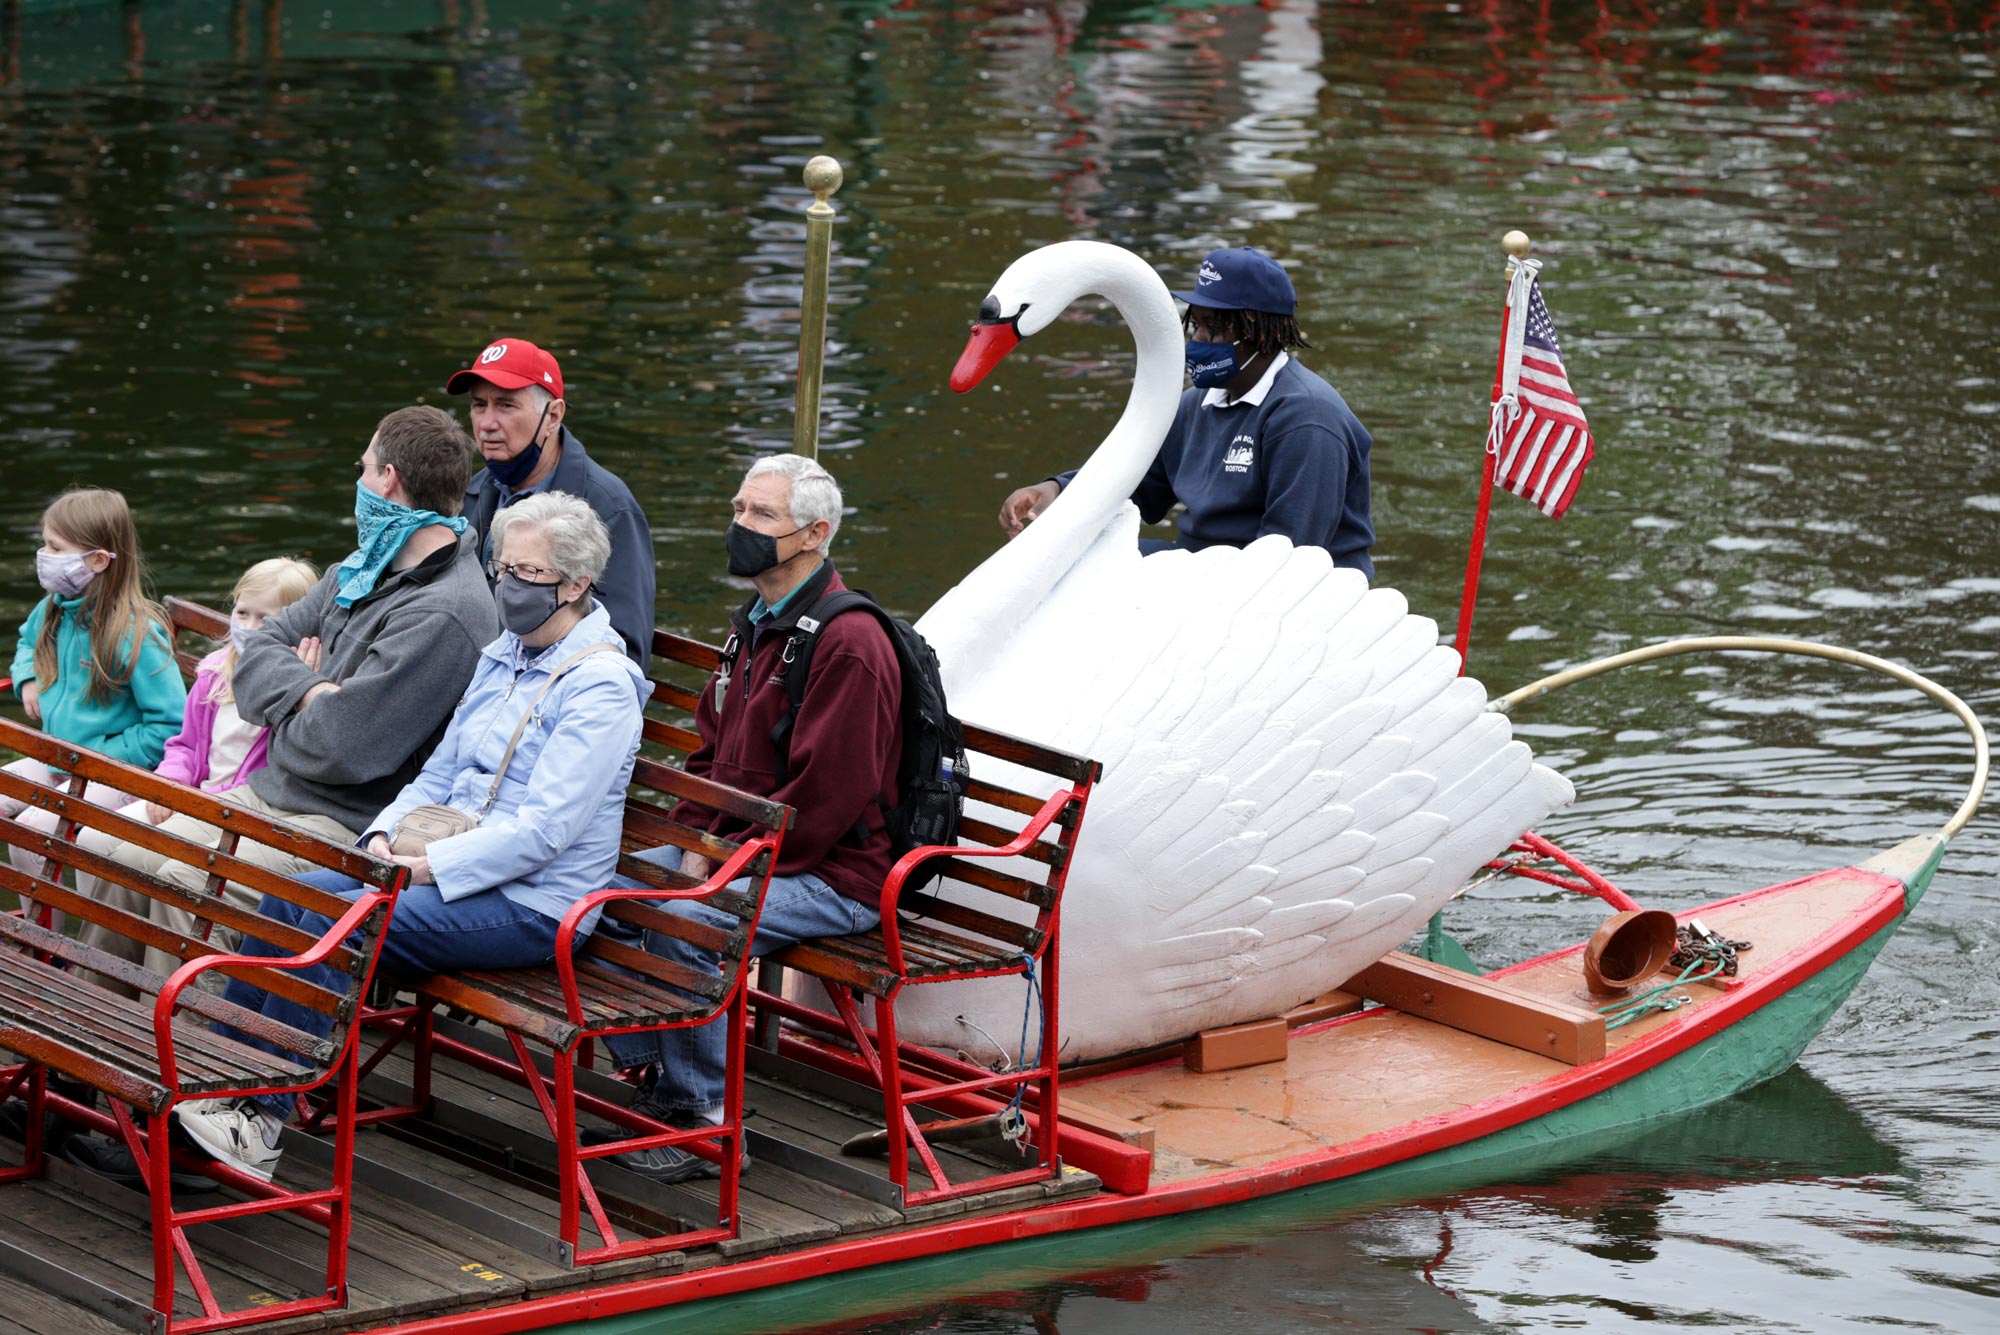 A photo of Swan Boats in Boston Public Garden. Passengers on the boats are wearing masks.